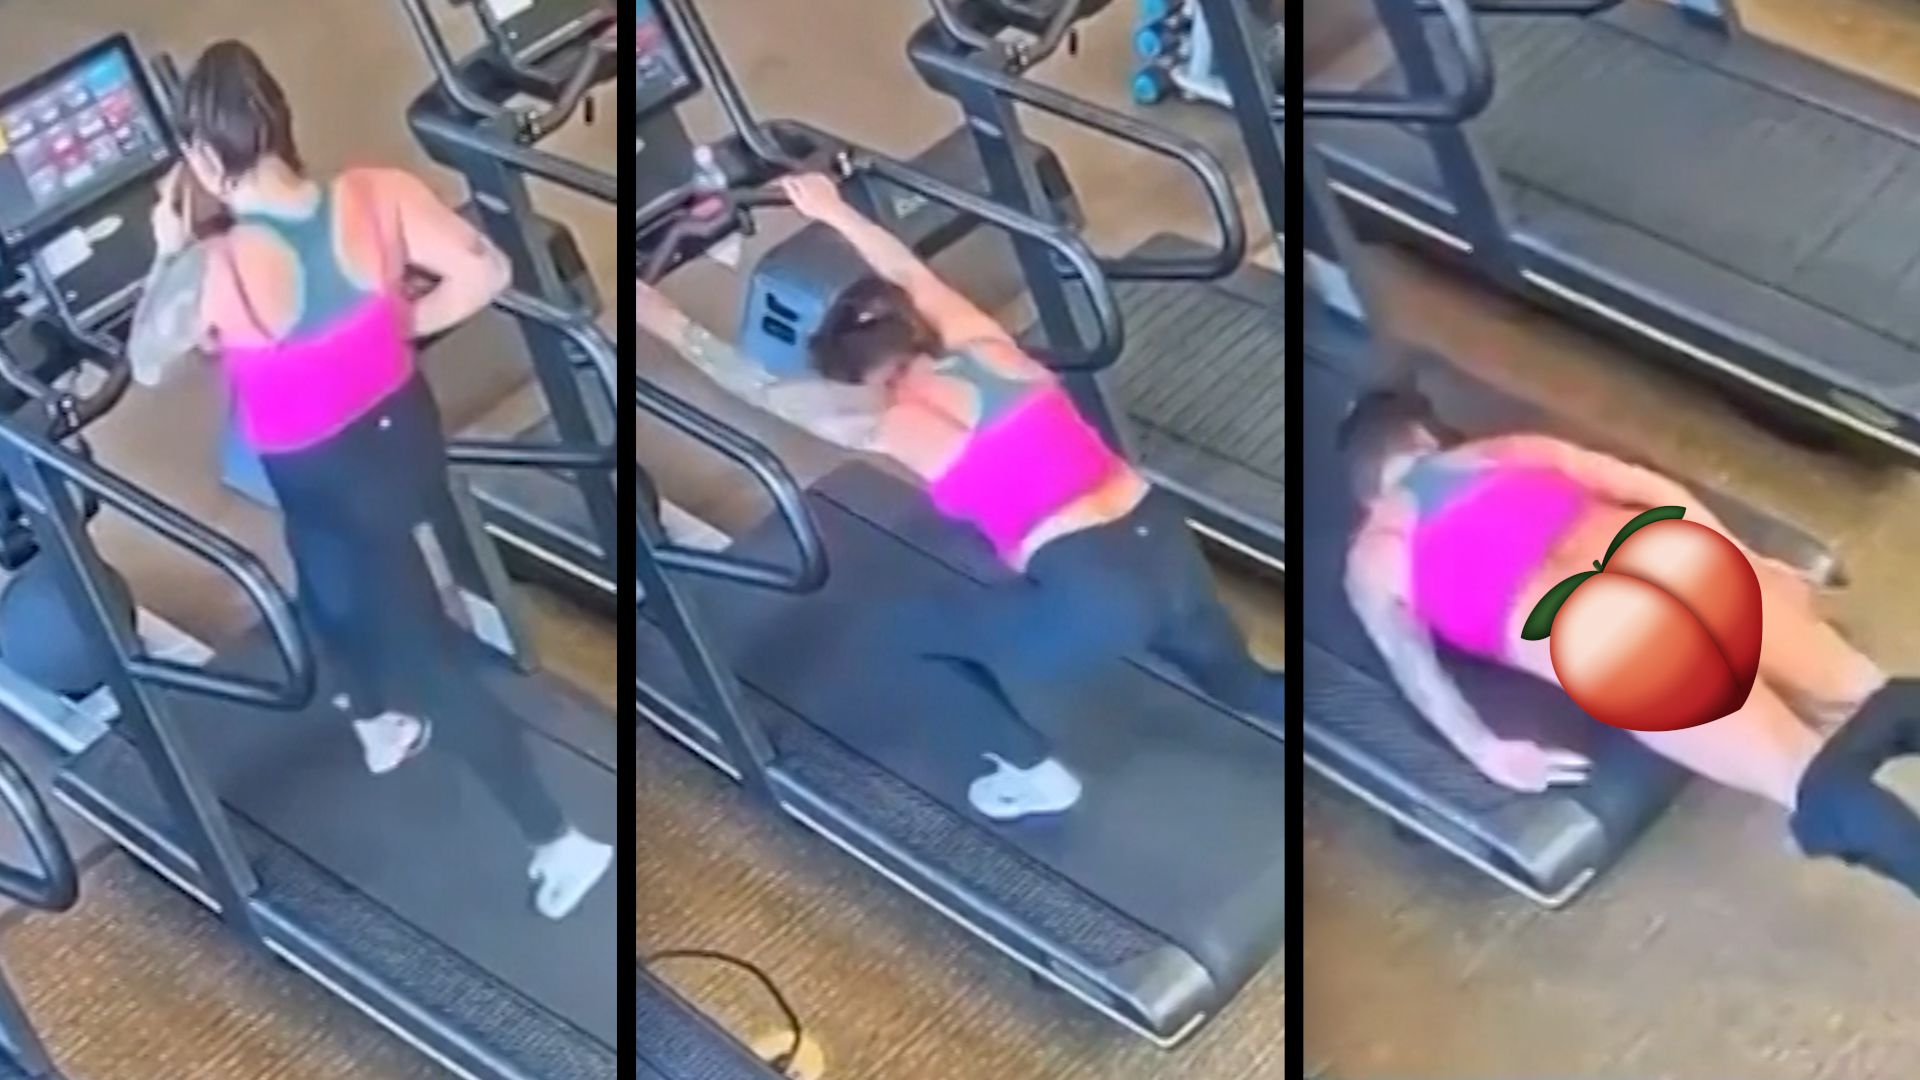 This woman fell on the treadmill at the gym. What happened next